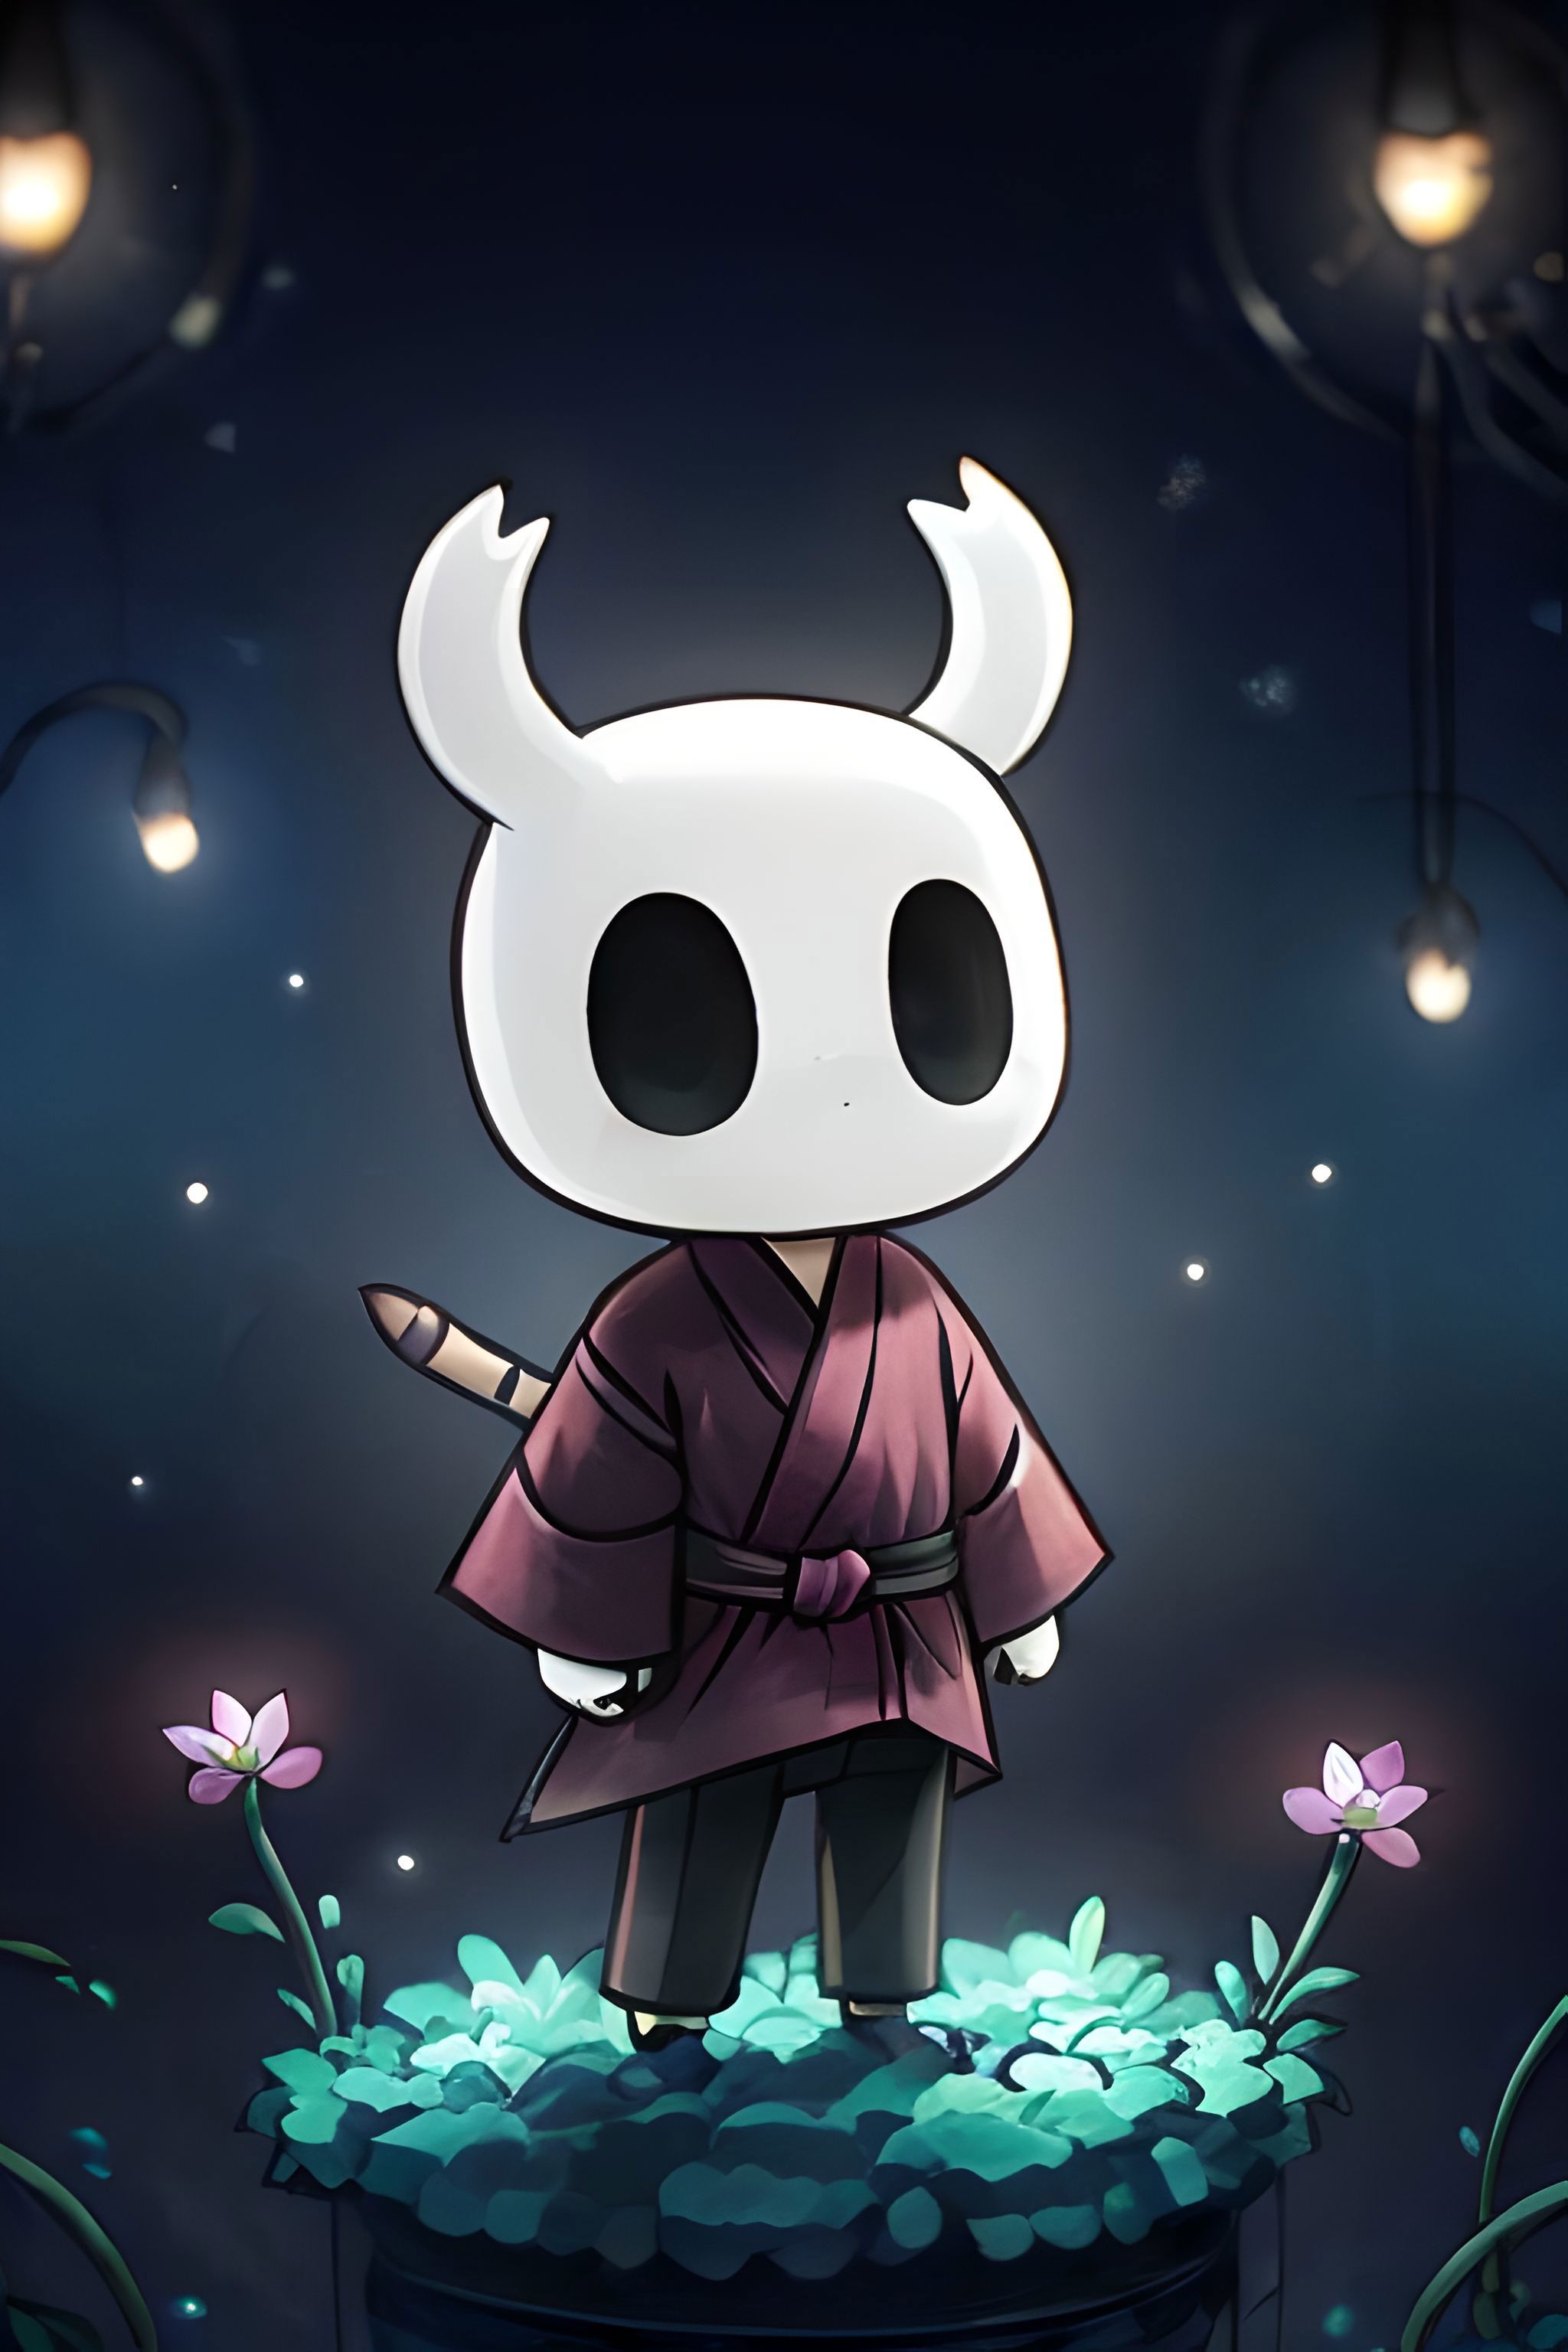 Hollow Knight/空洞骑士 image by Aseer